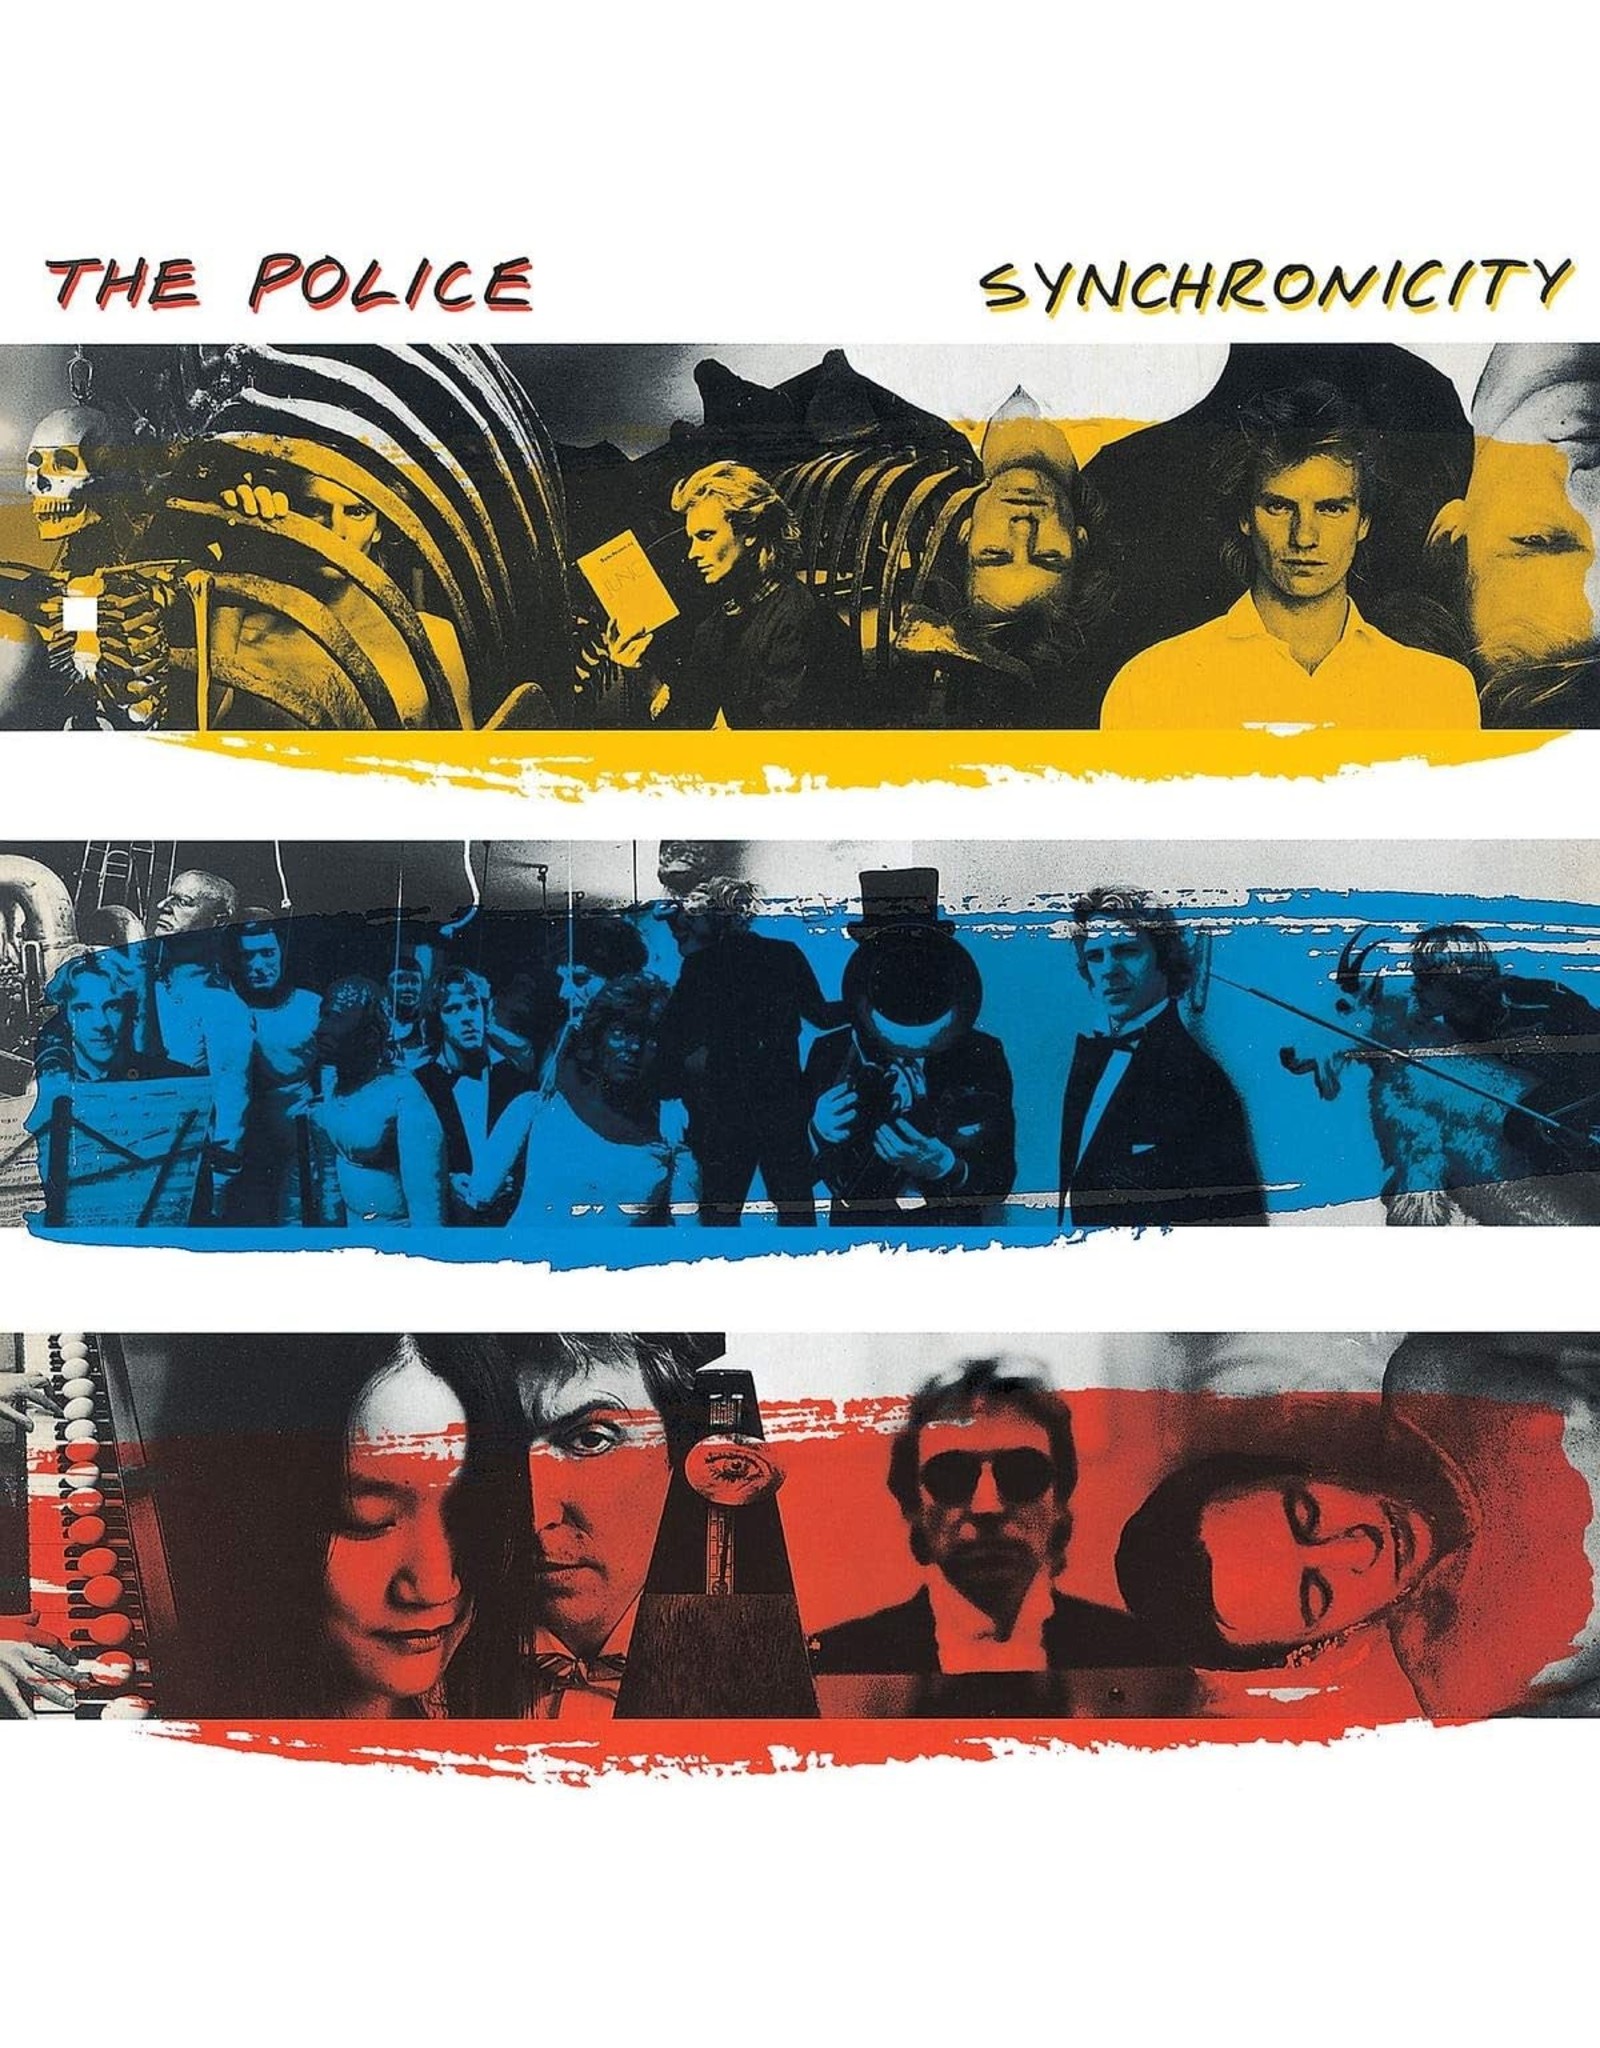 Police - Synchronicity (2019 Remaster)